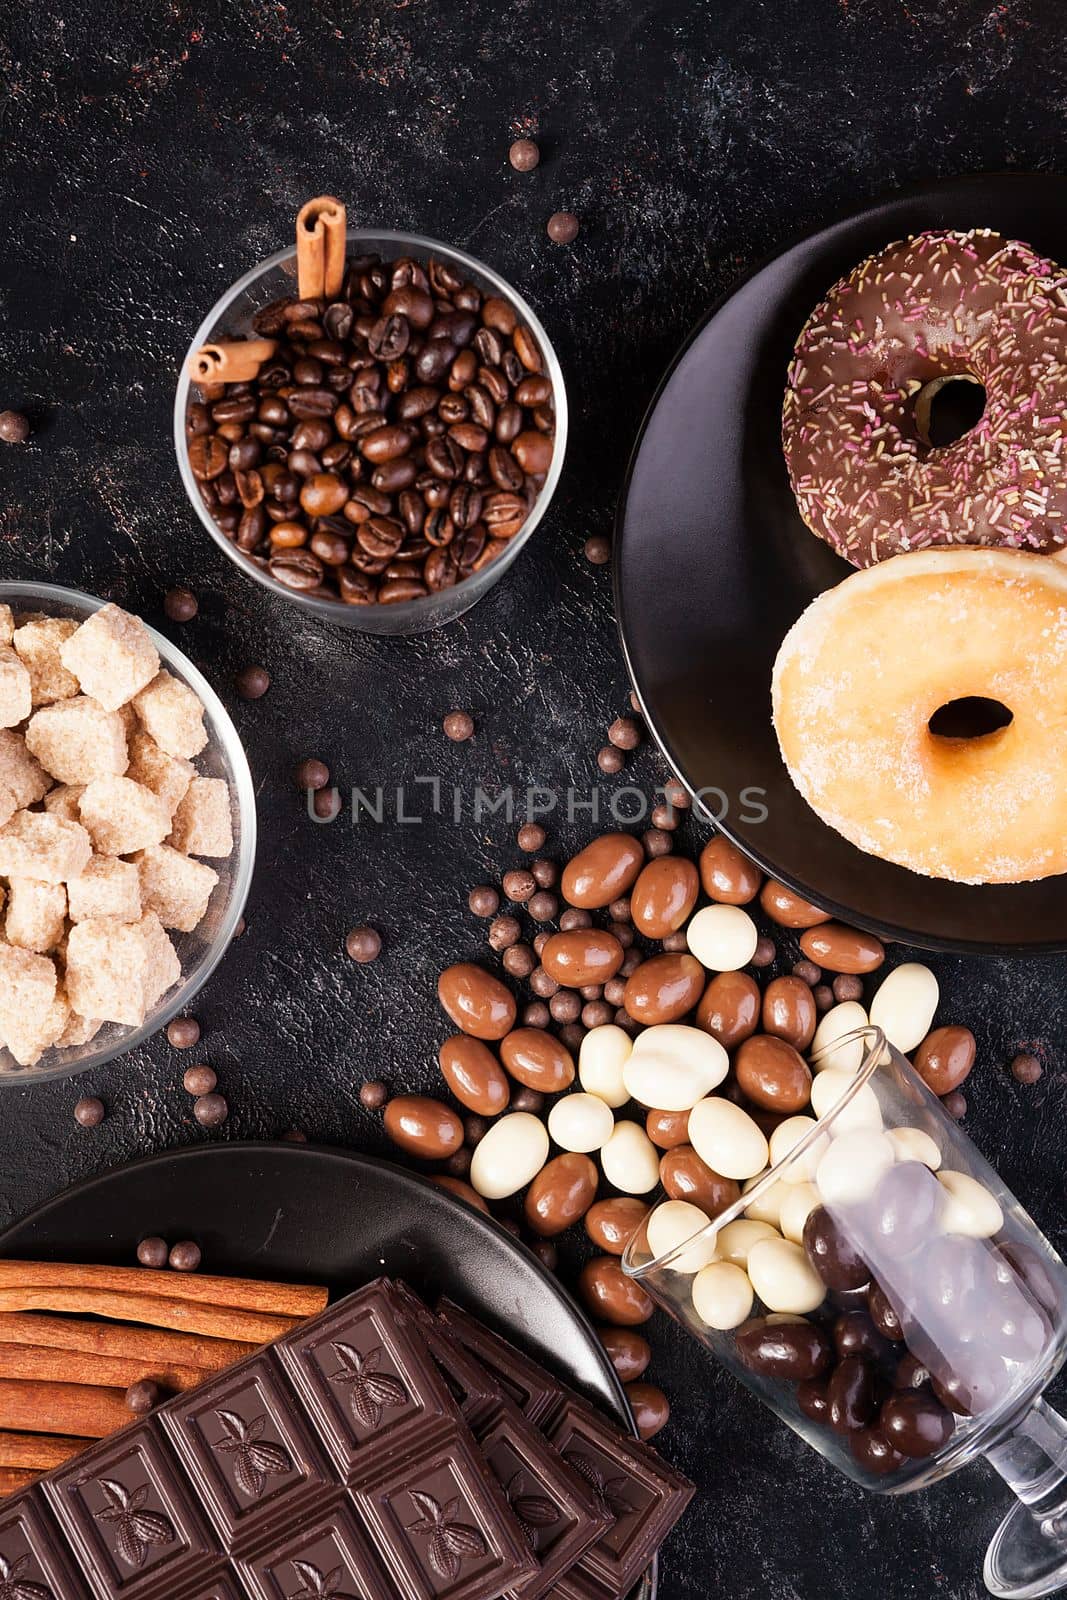 Top view of peanuts in chocolate, spilled on the dark board, next to chocolate tablets, donuts, brown sugar and coffee beans by DCStudio